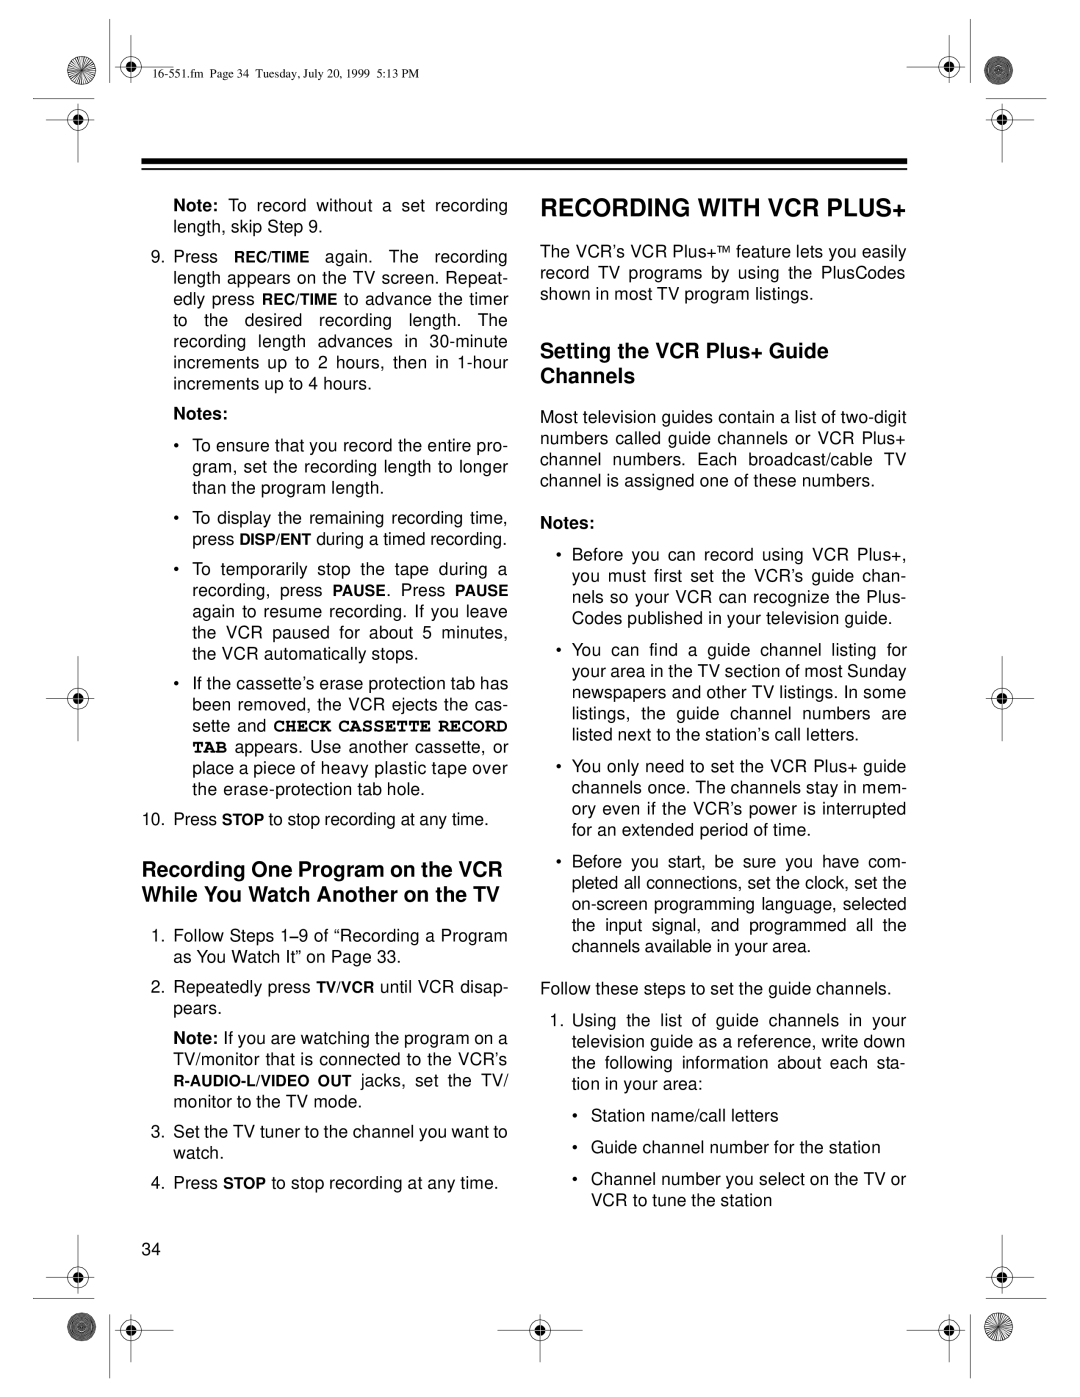 Optimus 63, 114 owner manual Recording With Vcr Plus+, Setting the VCR Plus+ Guide Channels 